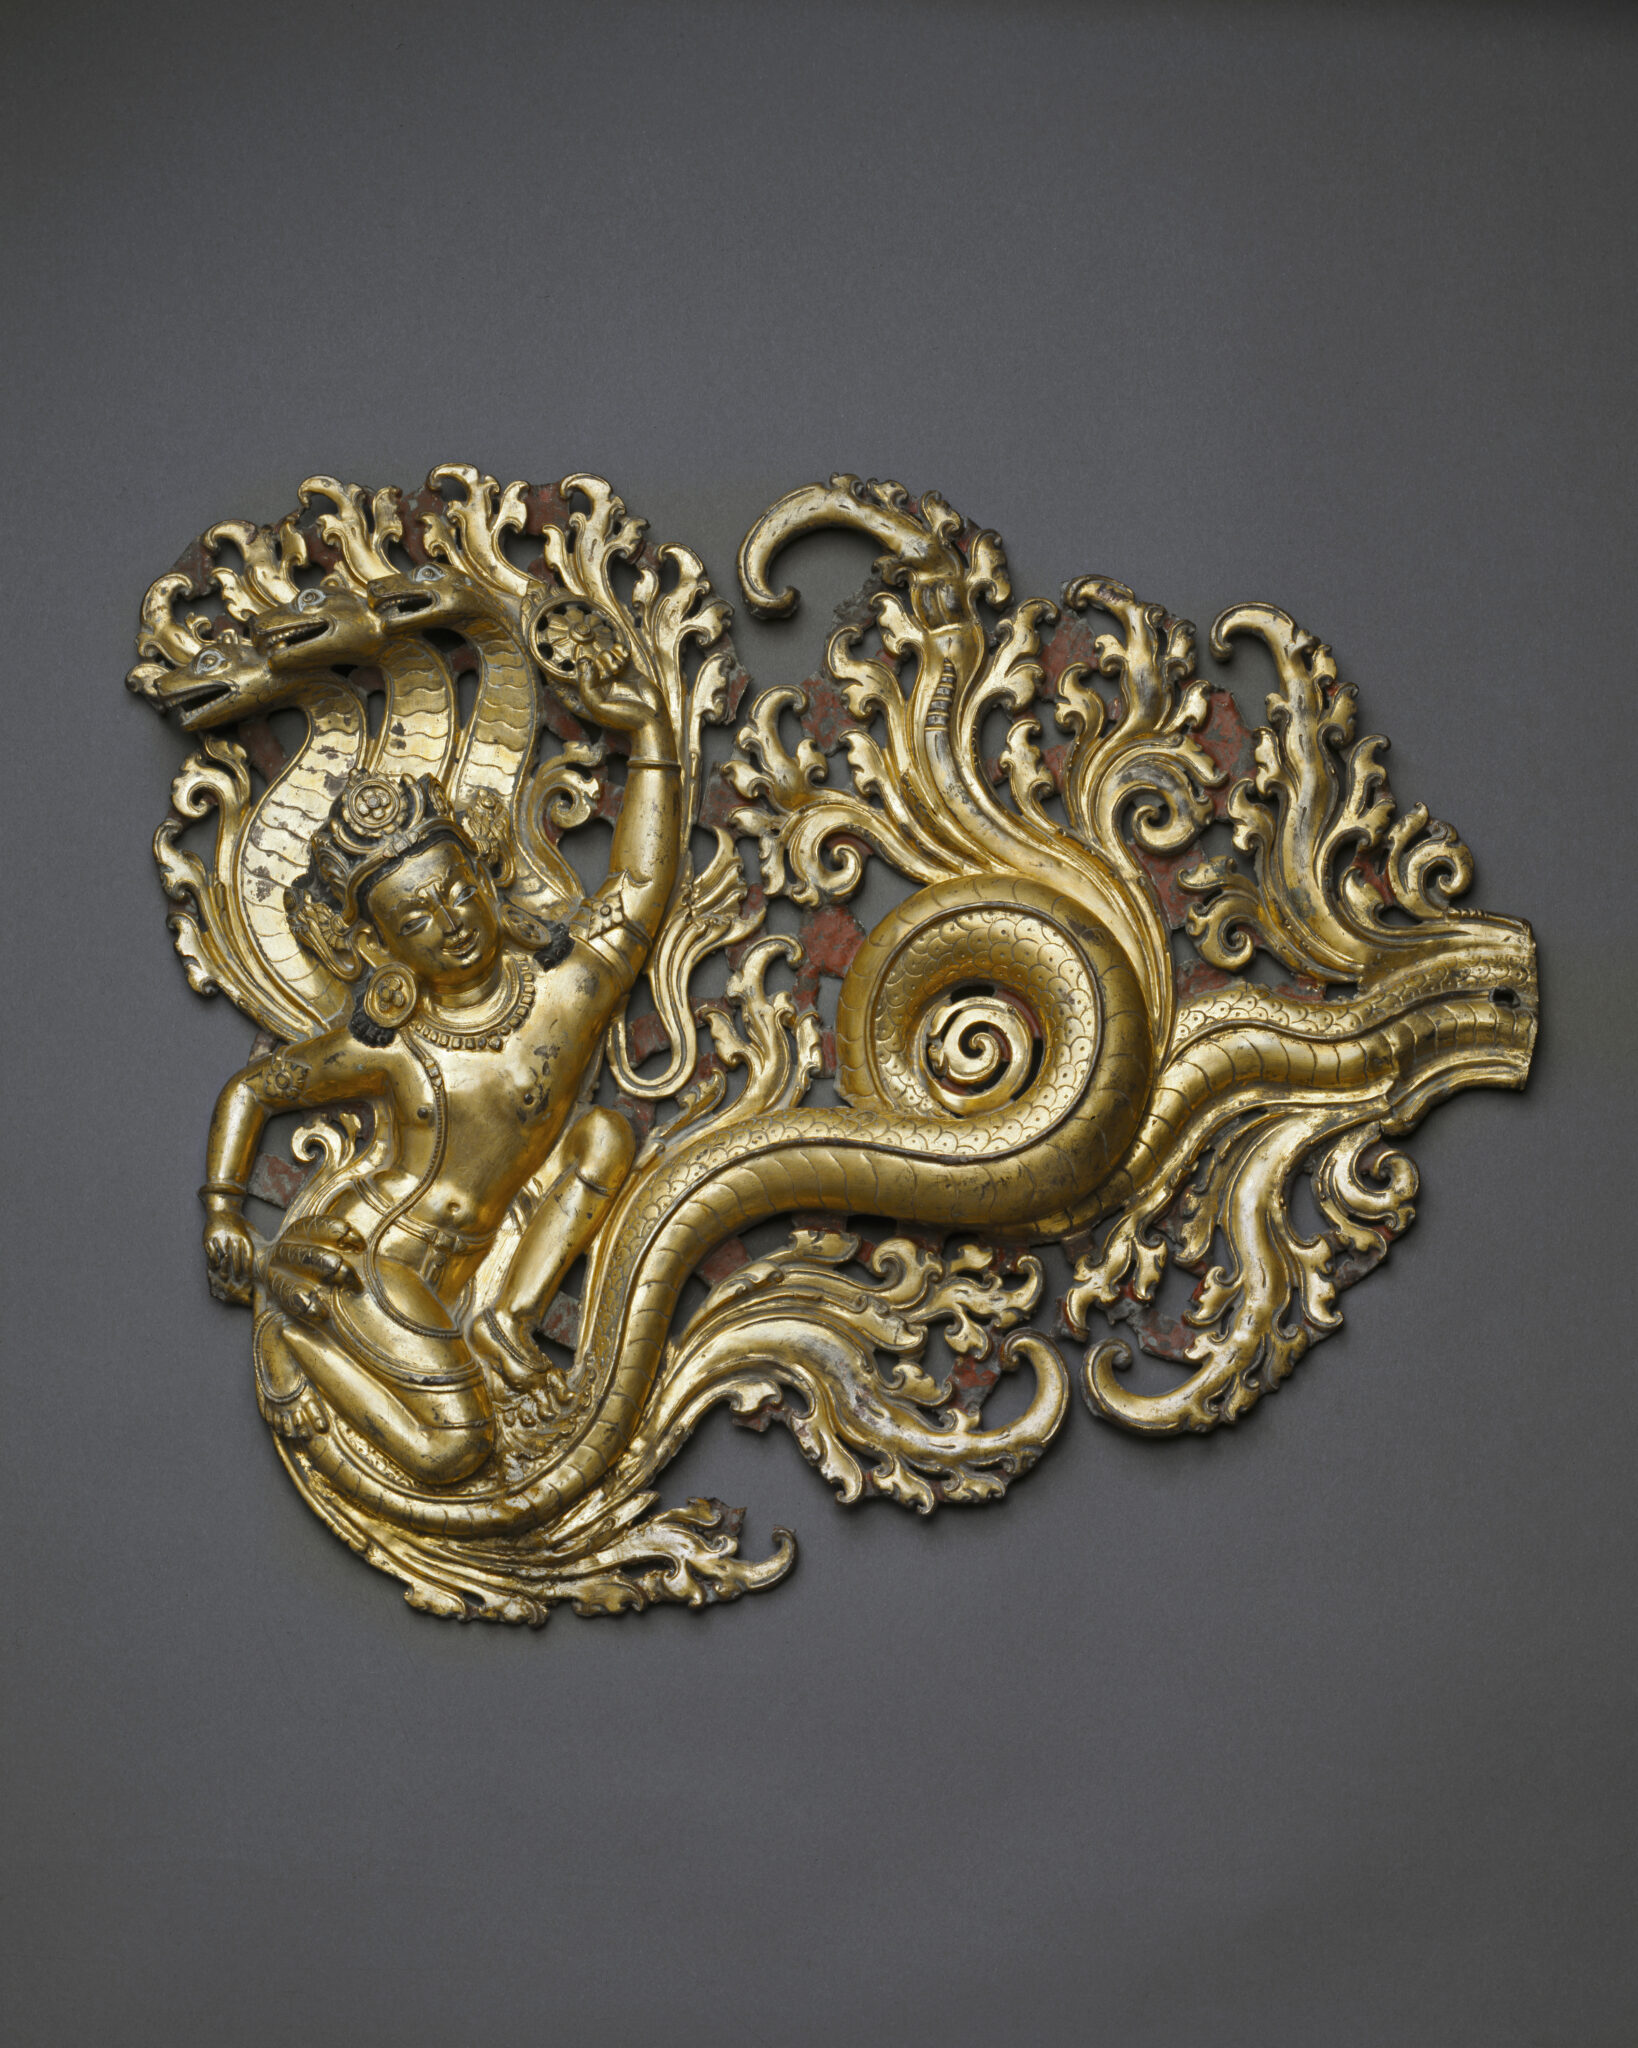 Gilt open metalwork depicting serpent deity hooded by three snakes, her tail curling amidst acanthus scrolls